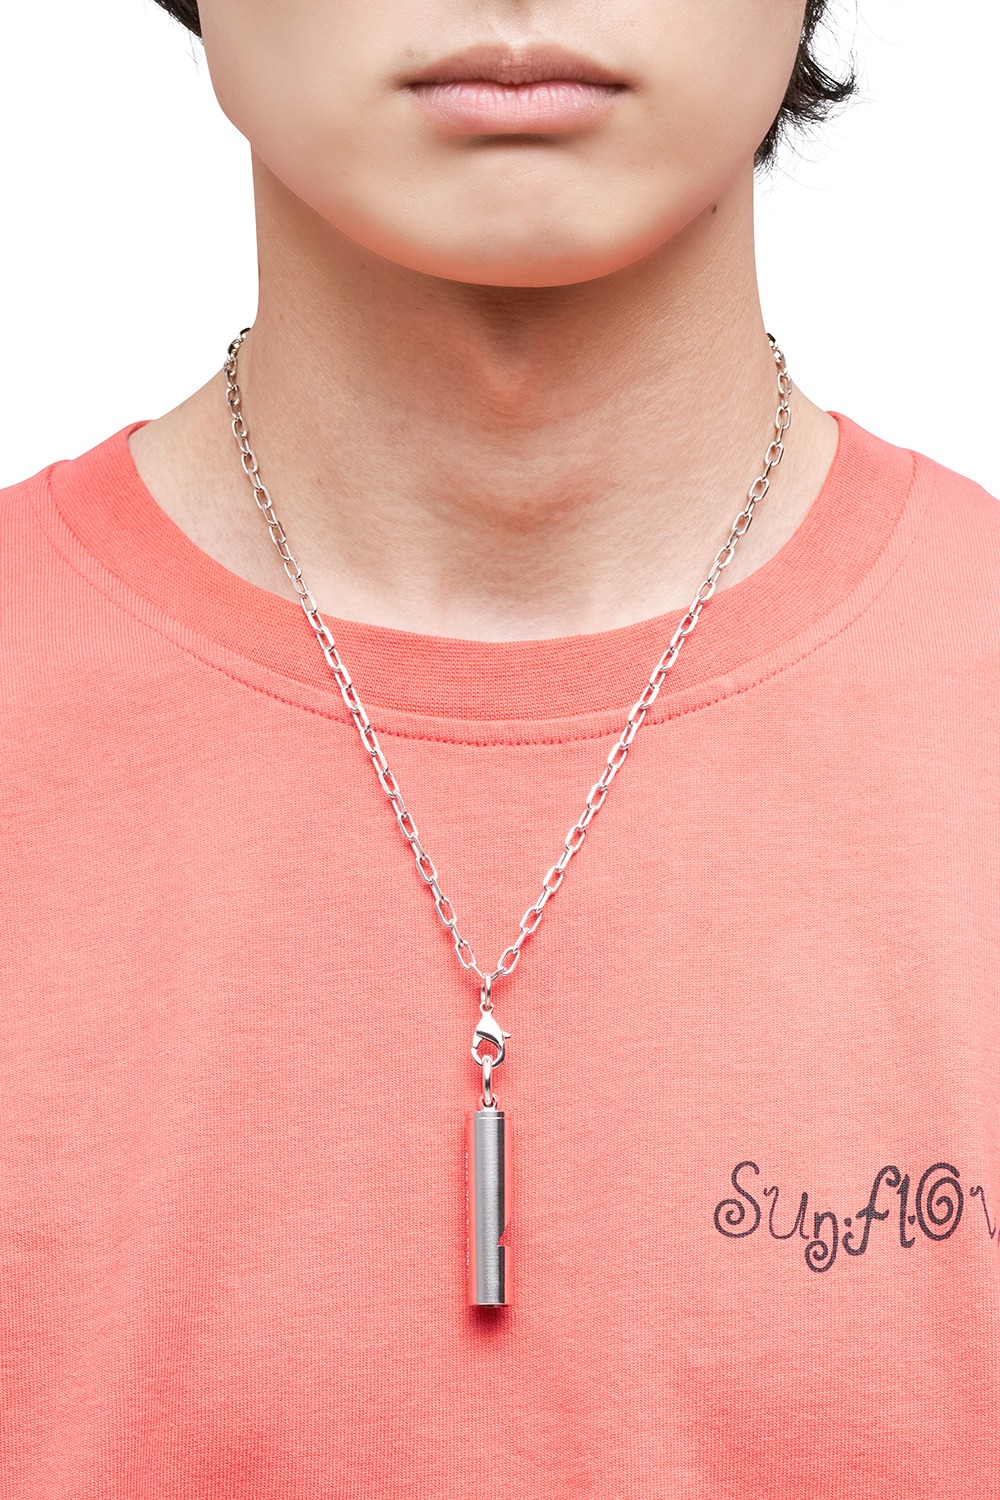 WHISTLE NECKLACE WITH CHAIN